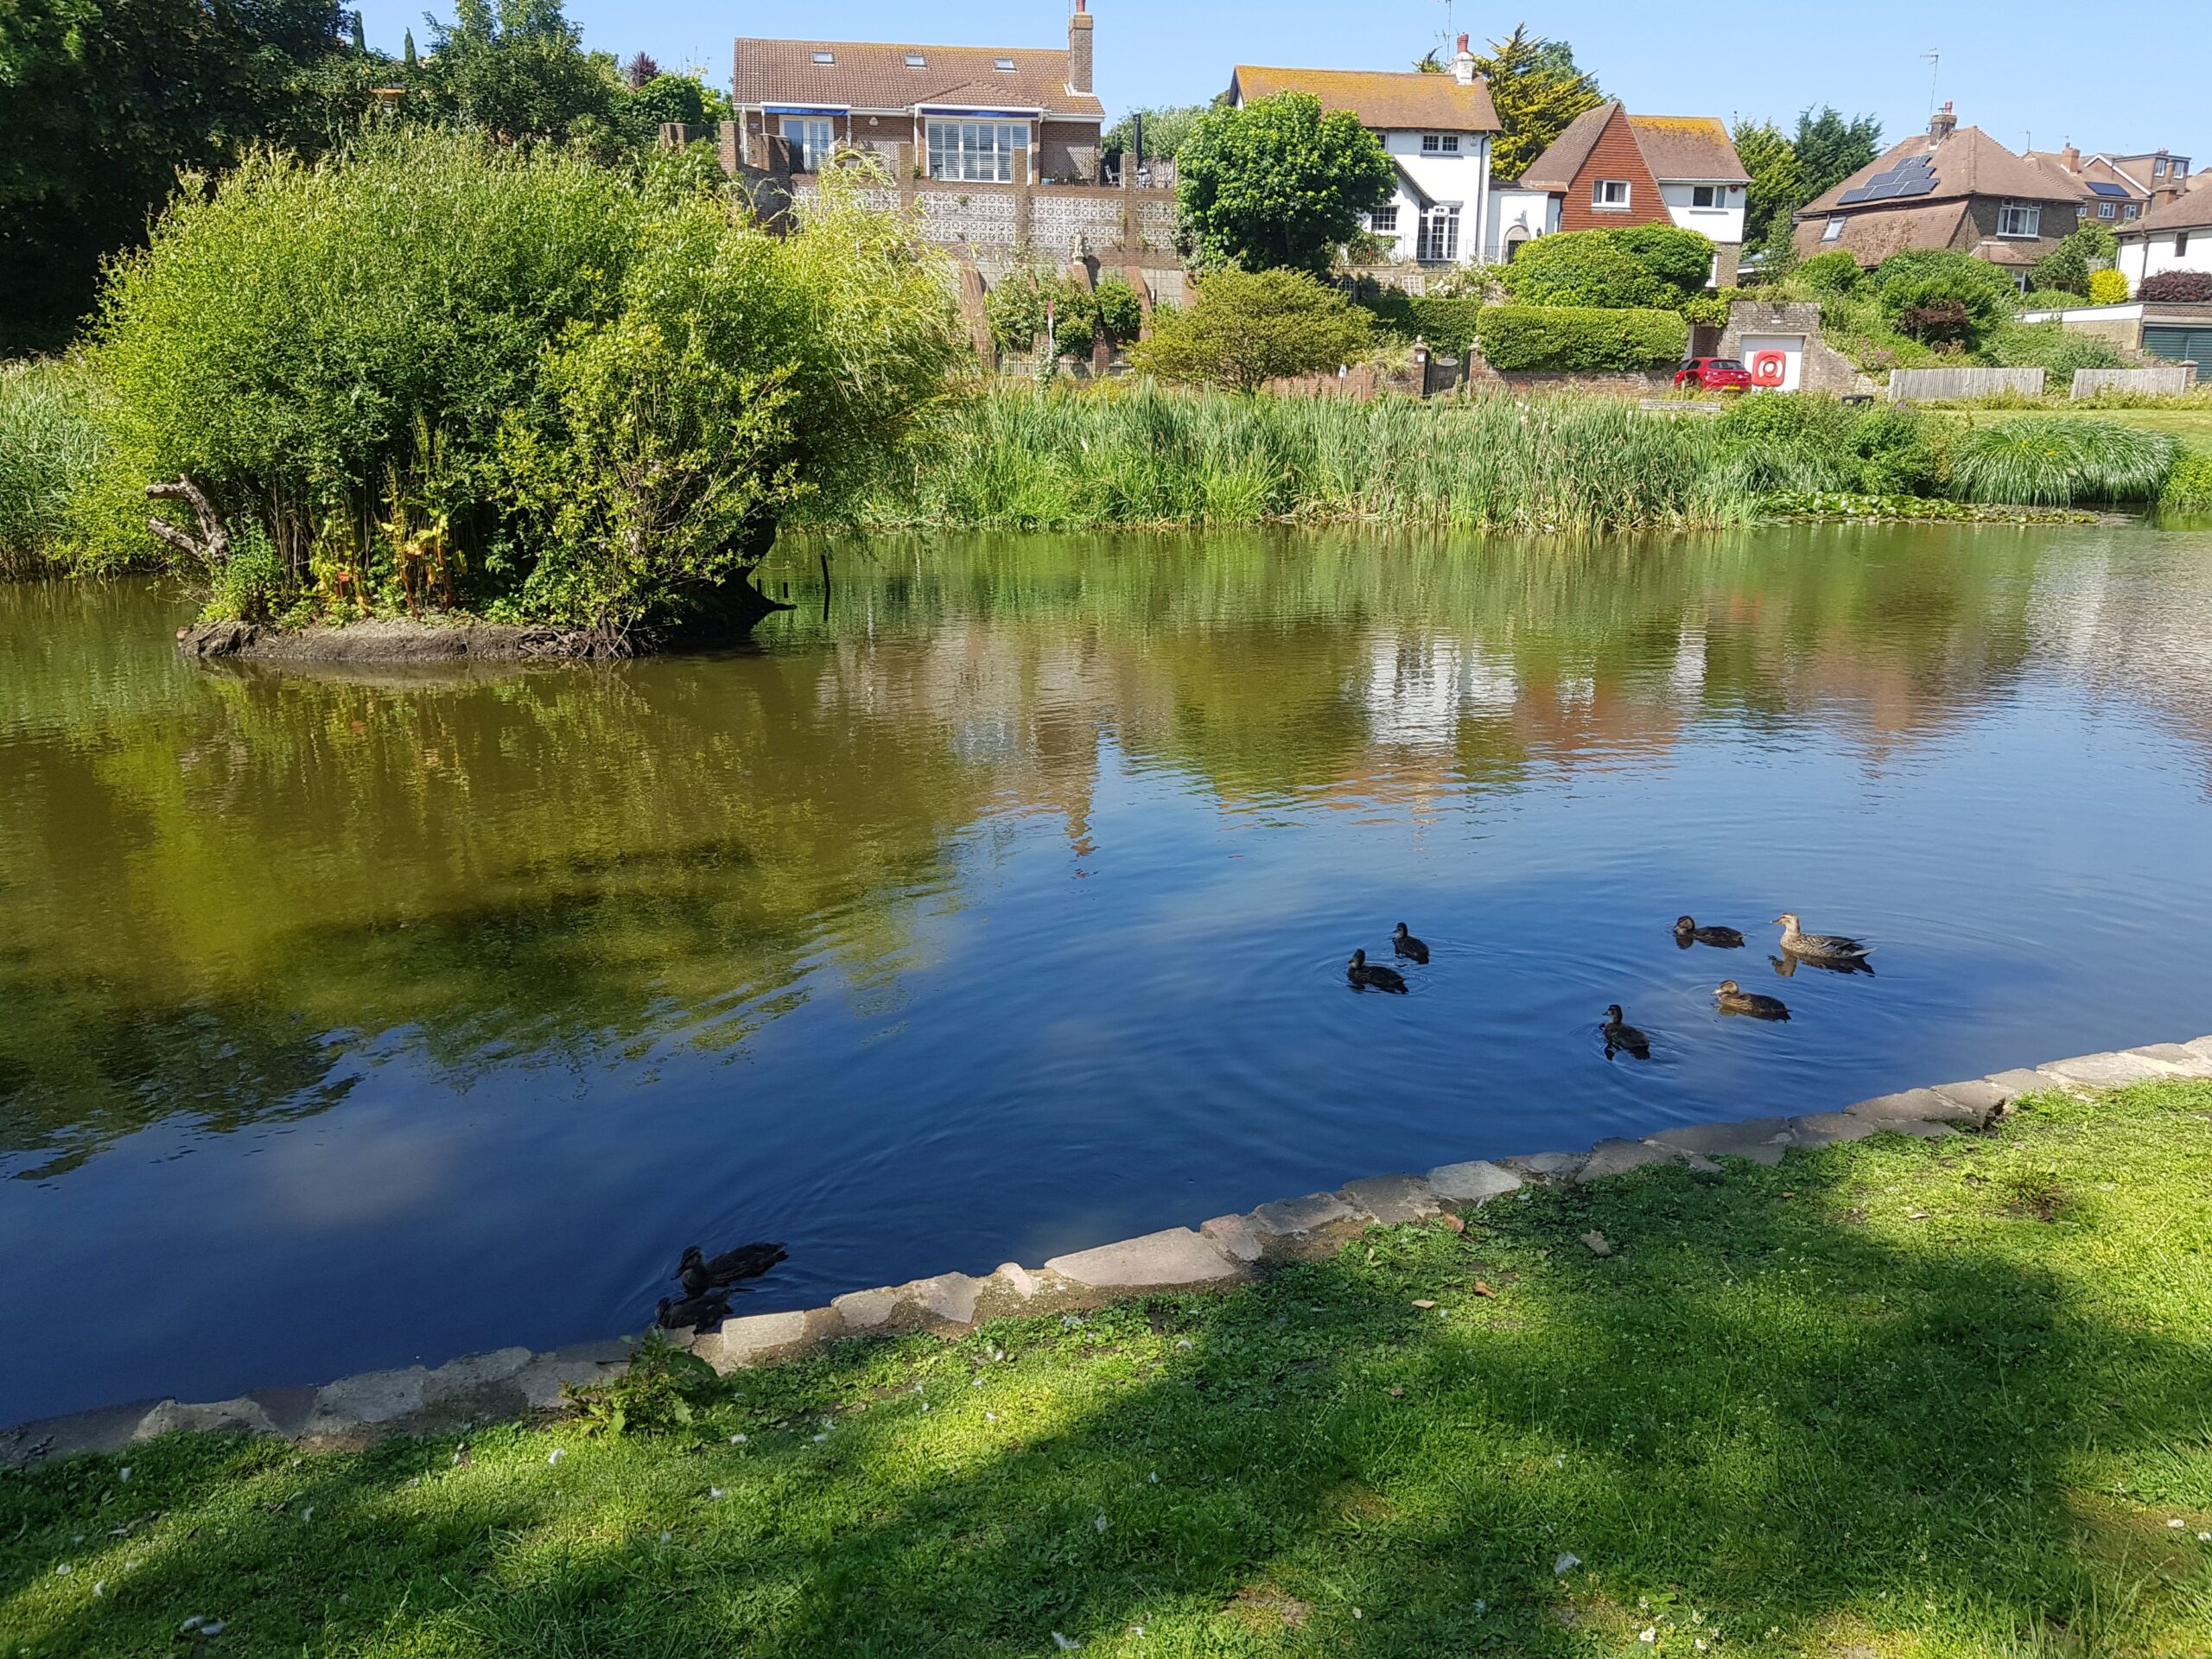 East Blatchington Pond in Seaford with baby ducklings